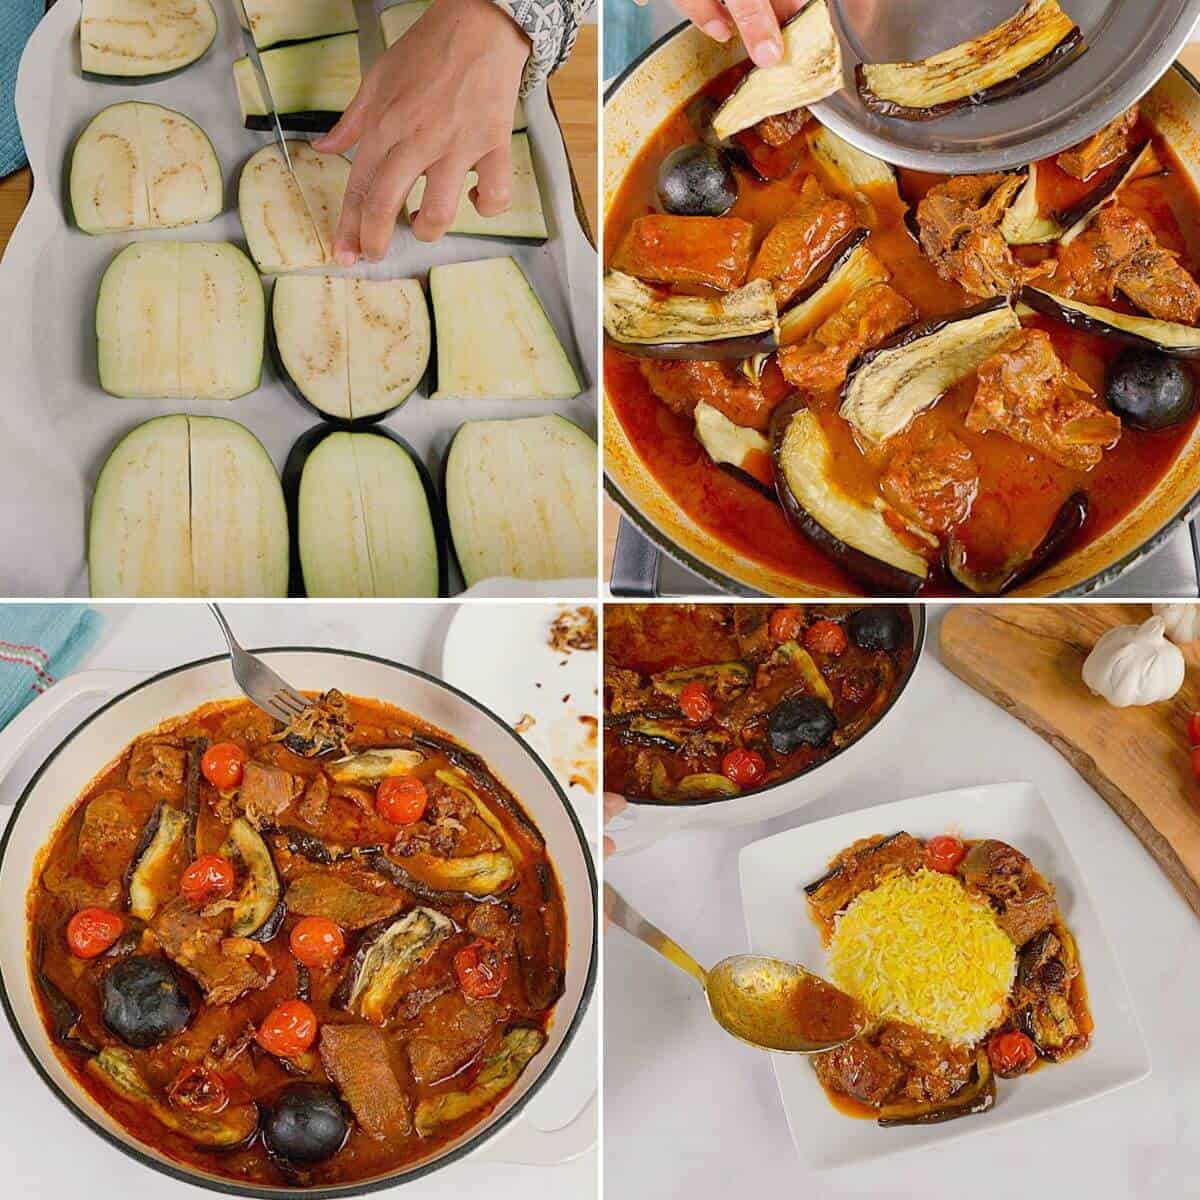 Cooking stew with roasted eggplant and serving.